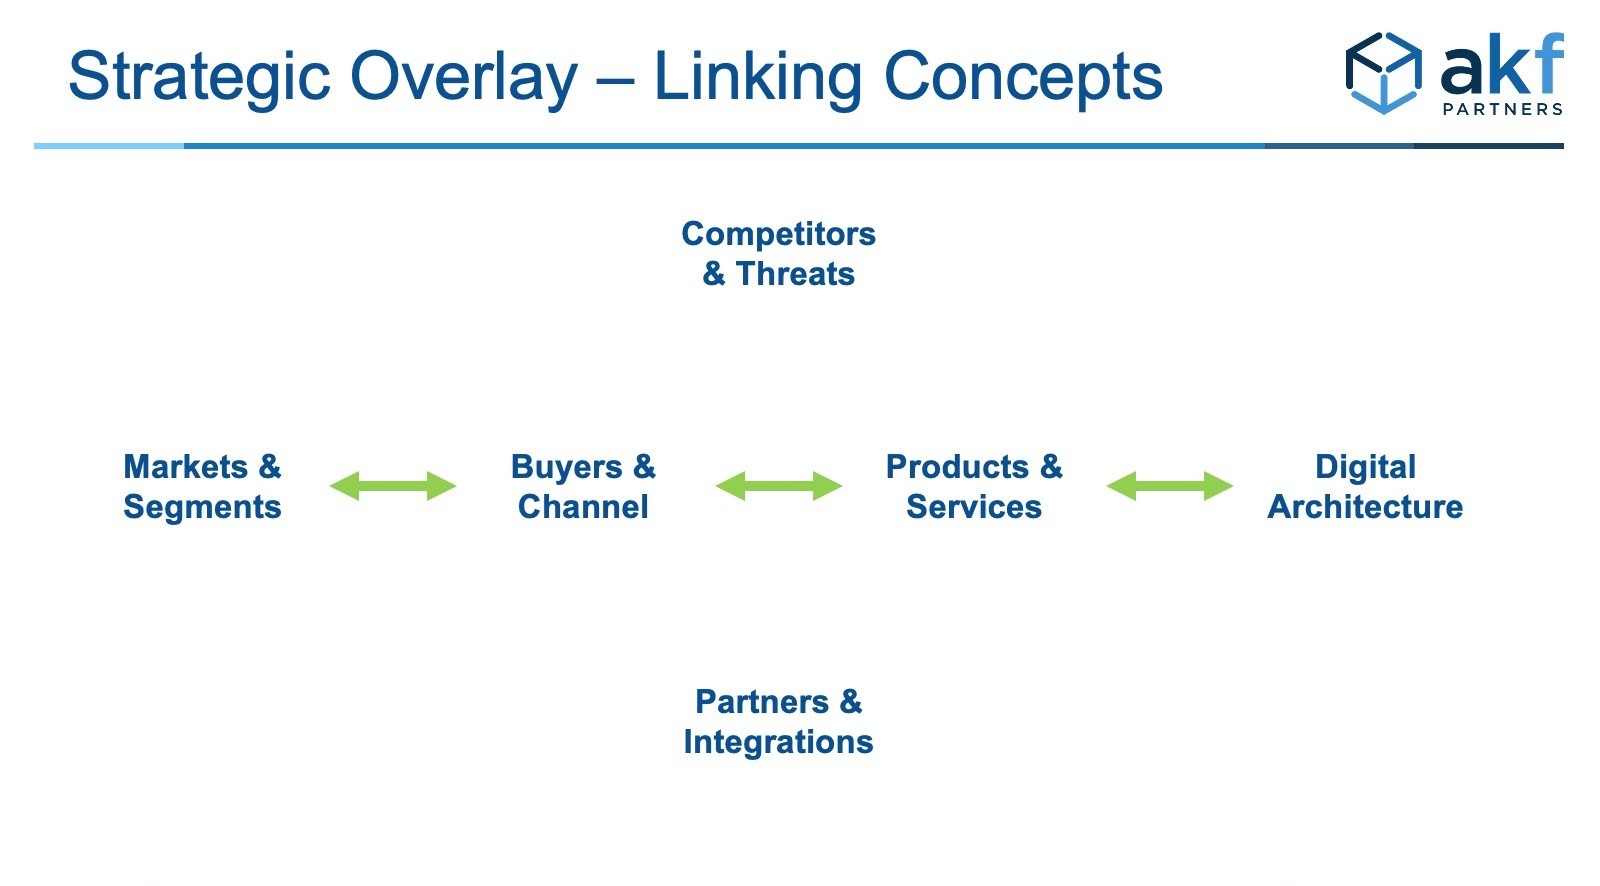 linkage between teams and concepts